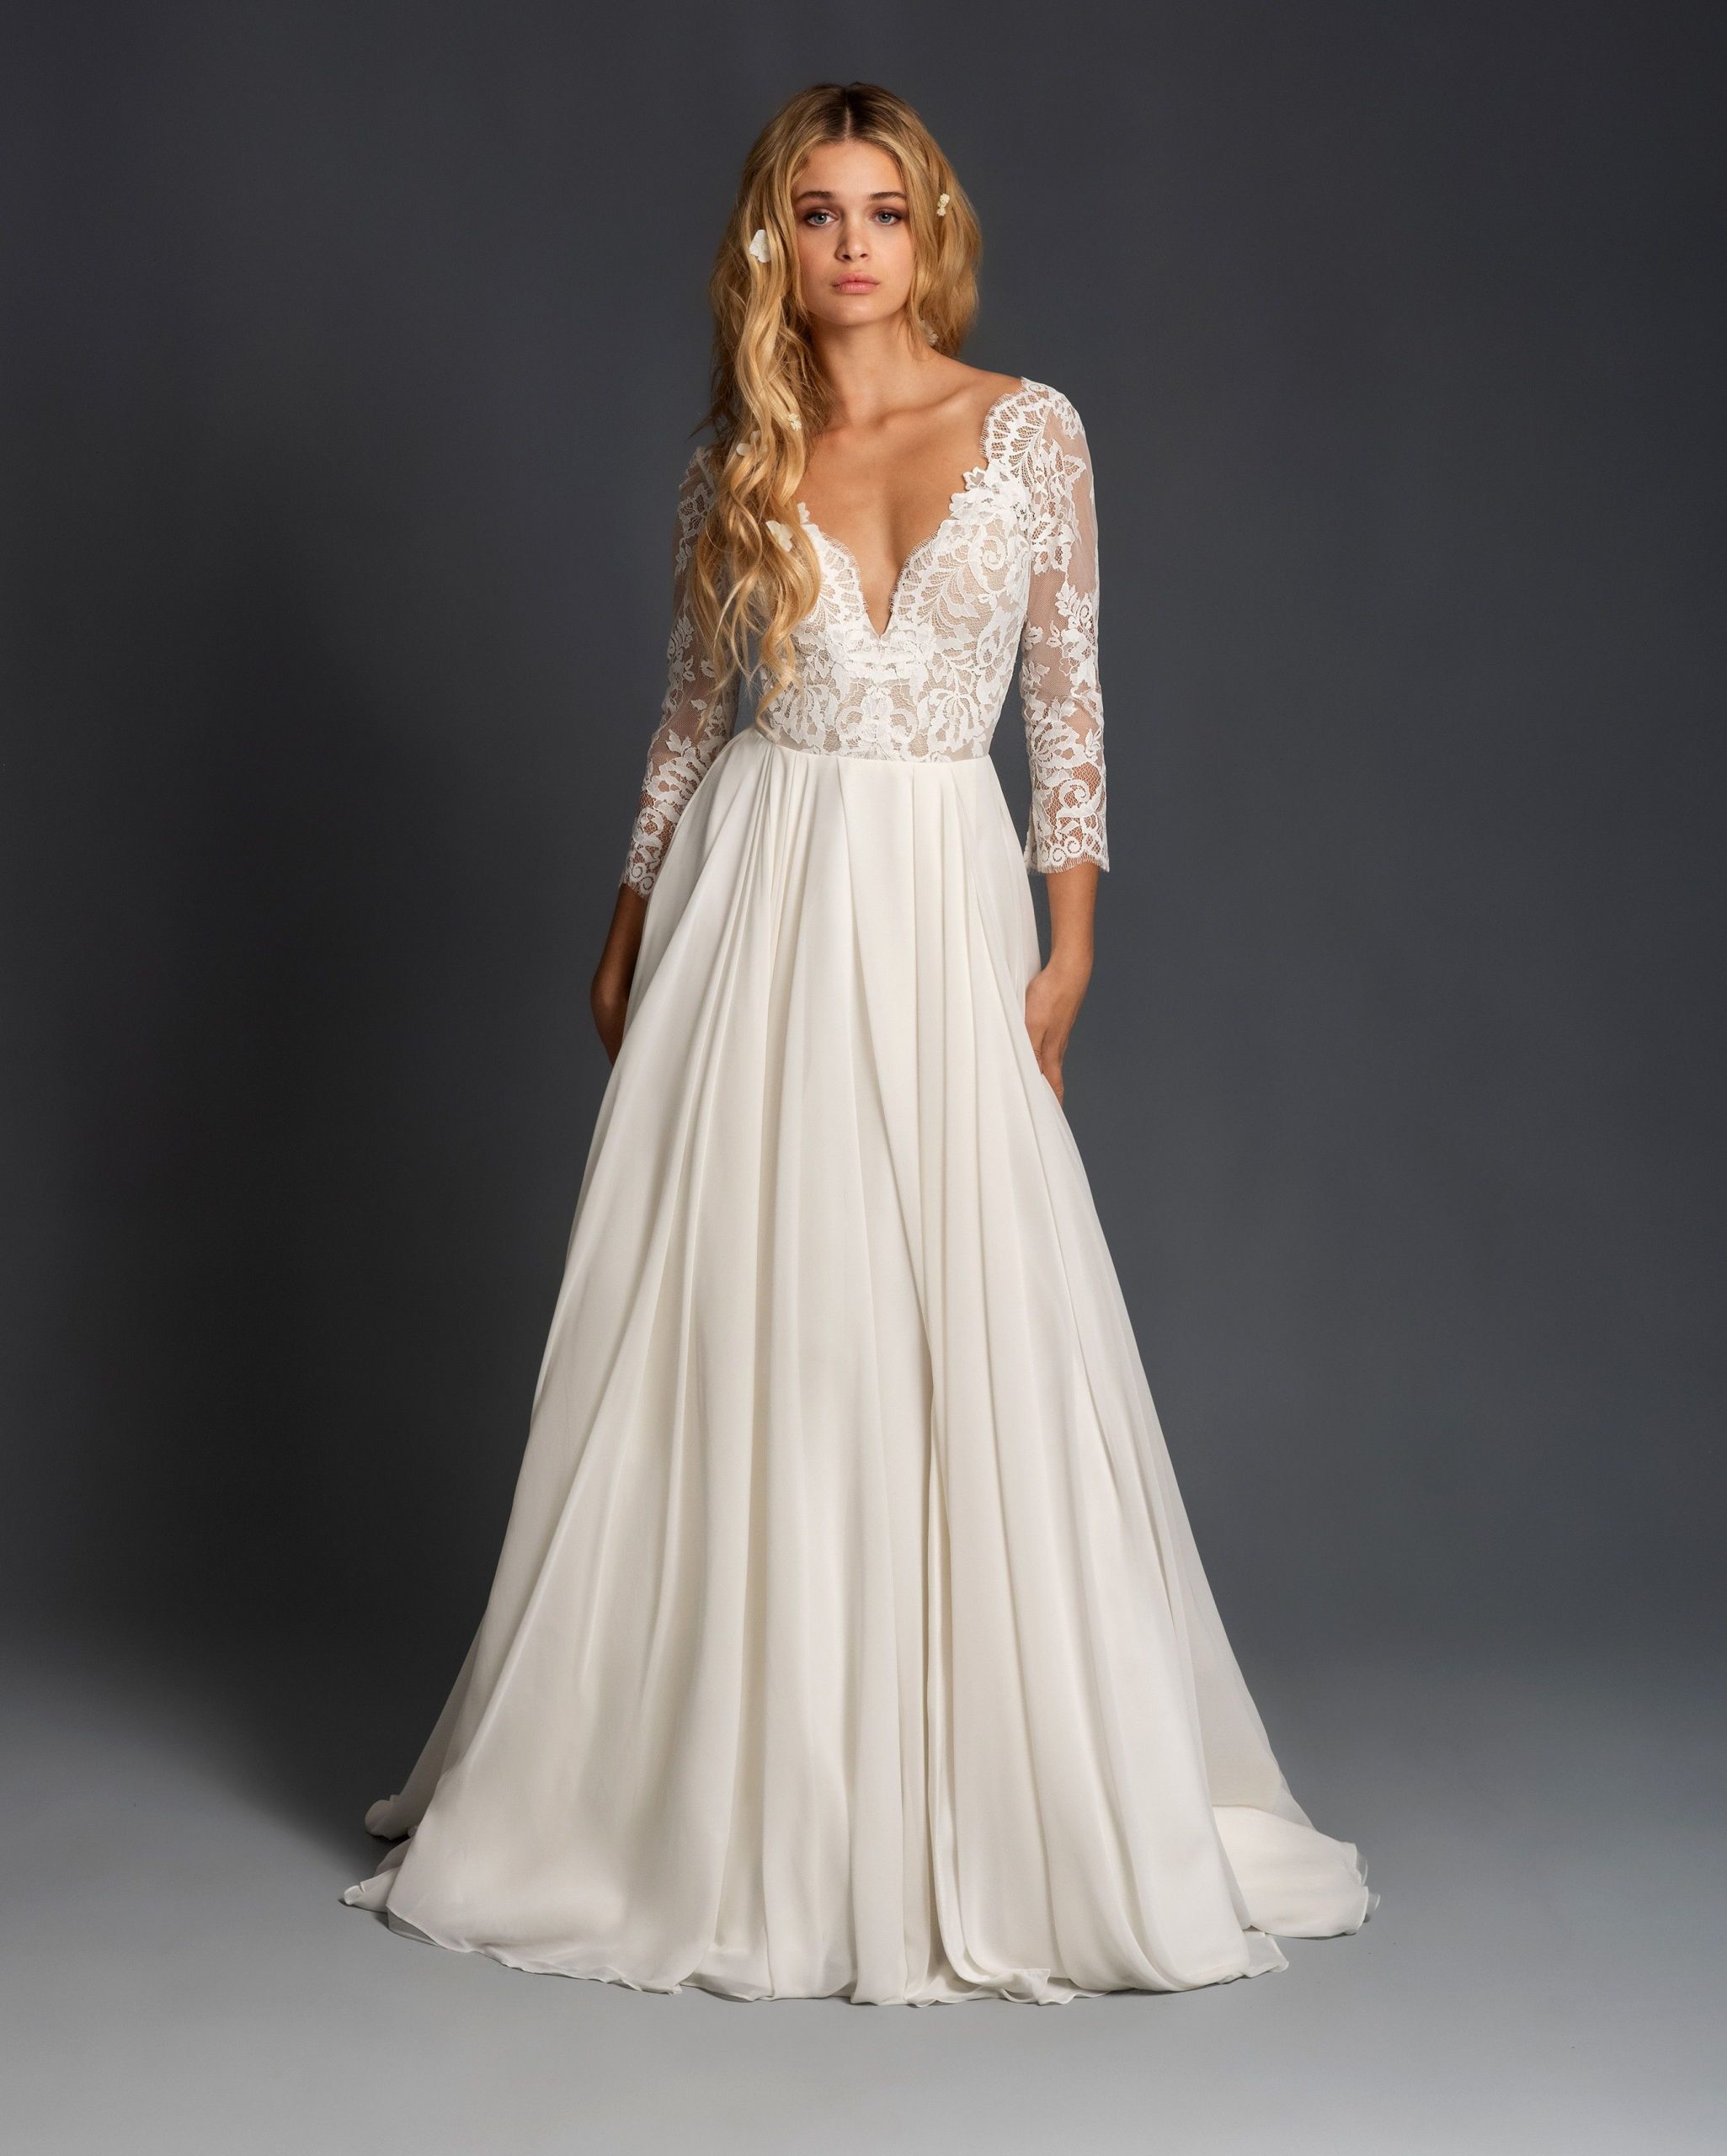 Blush by Hayley Paige Spring 2020 Wedding Dress Collection